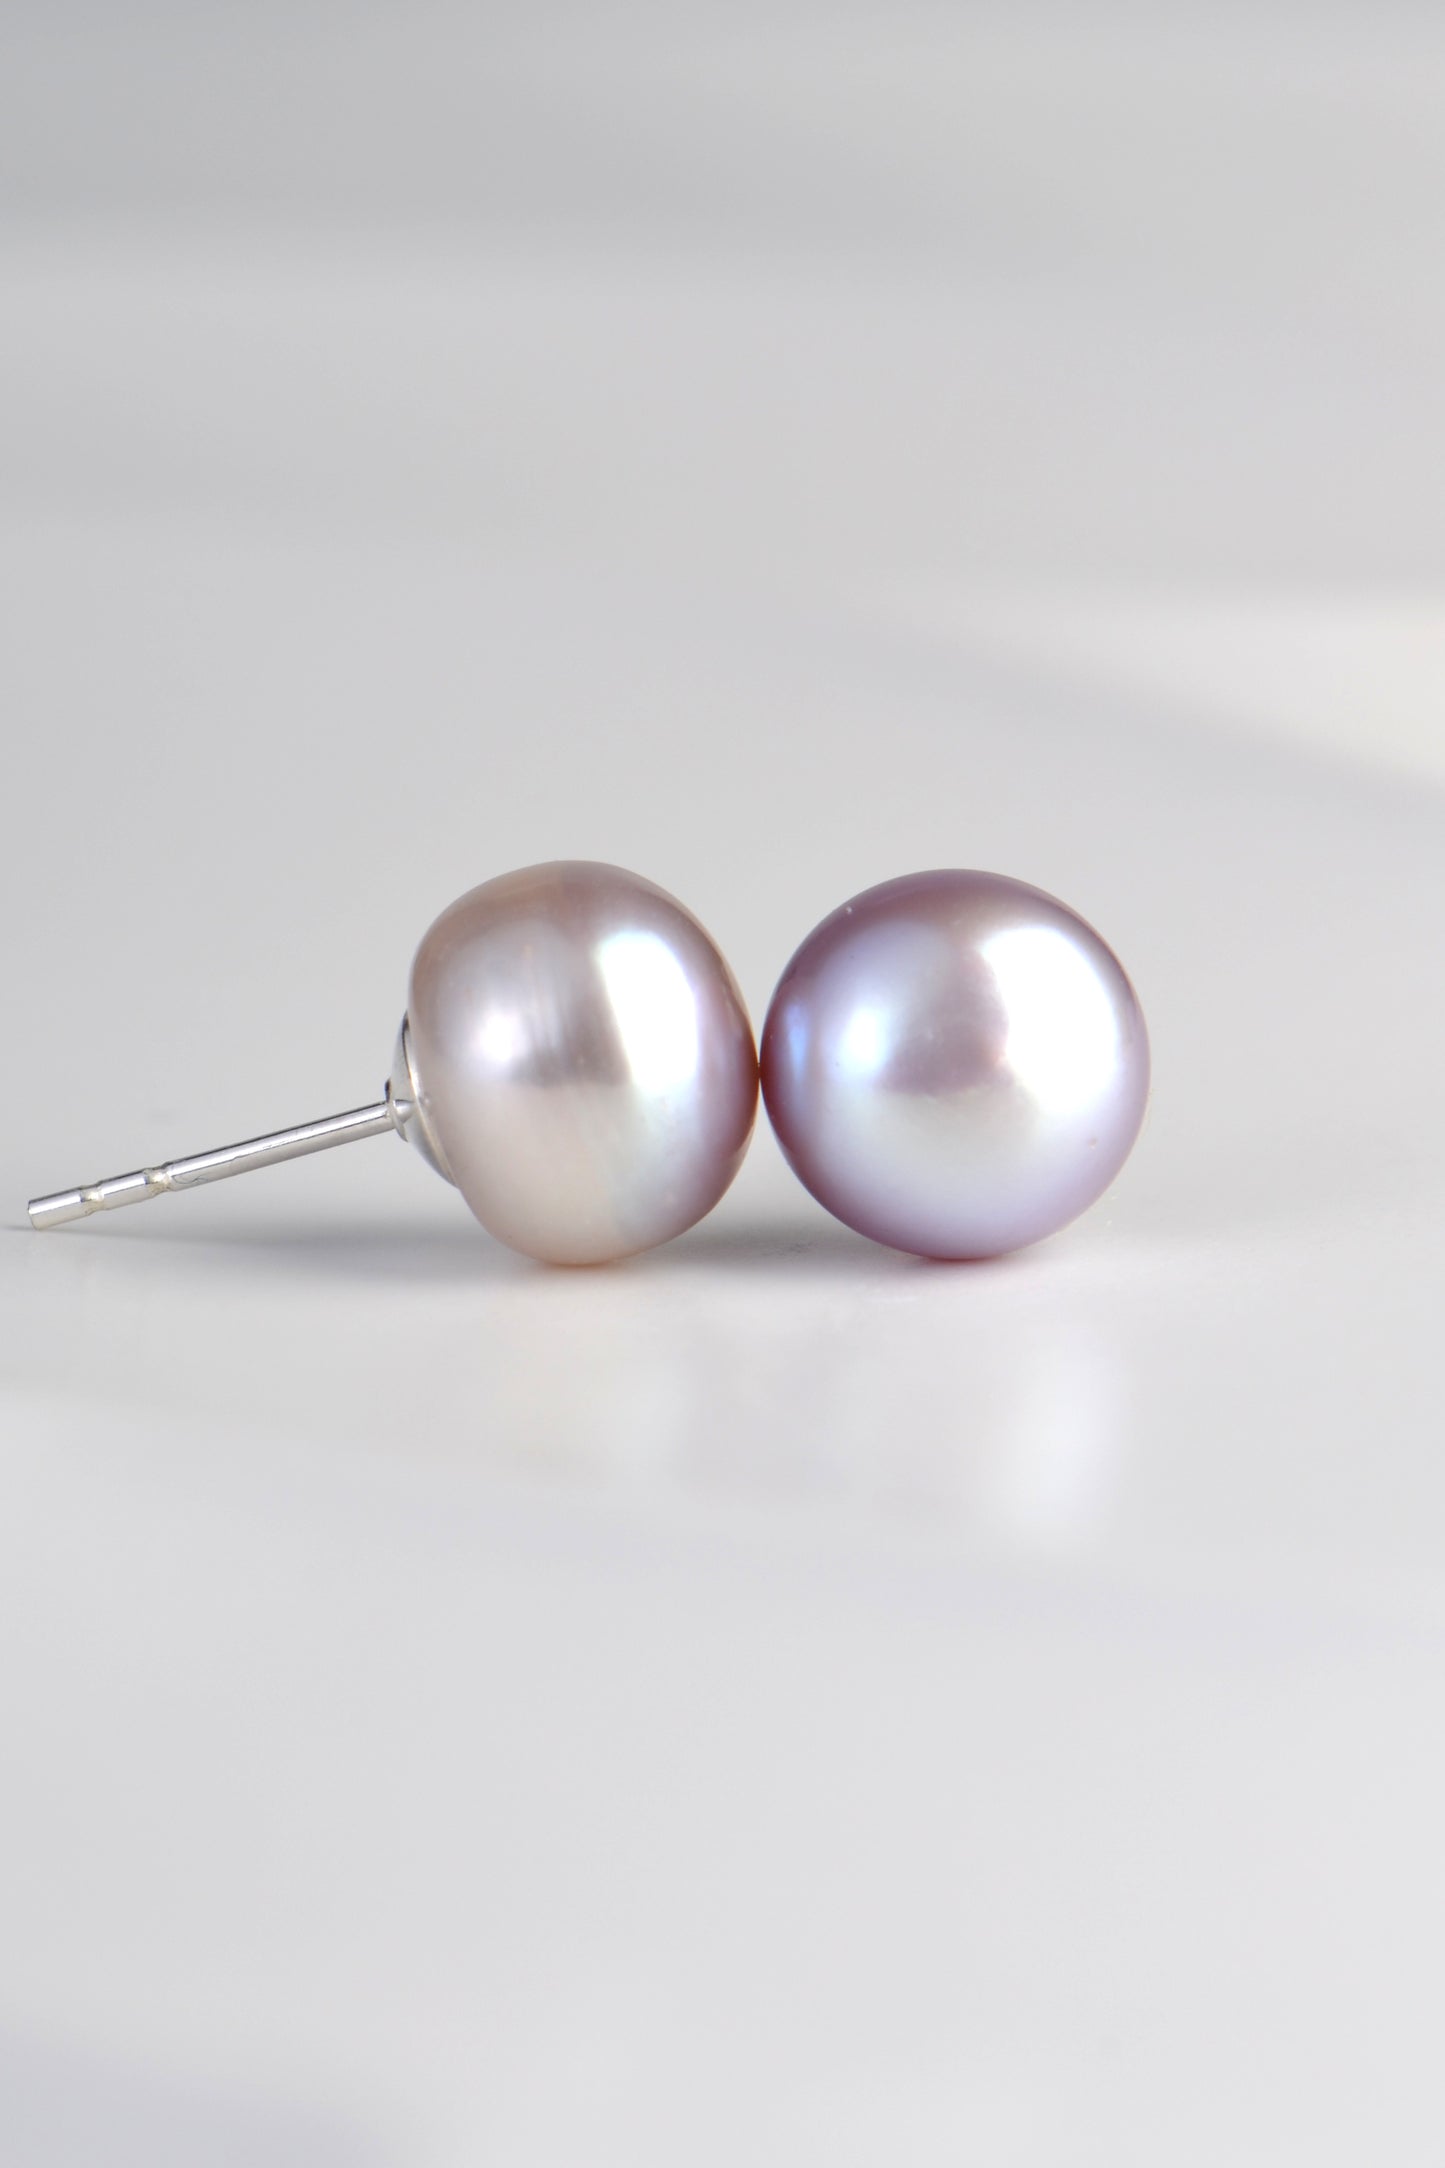 8mm real pearl stud earrings grey in some lights and angles and grey/ mauve in others